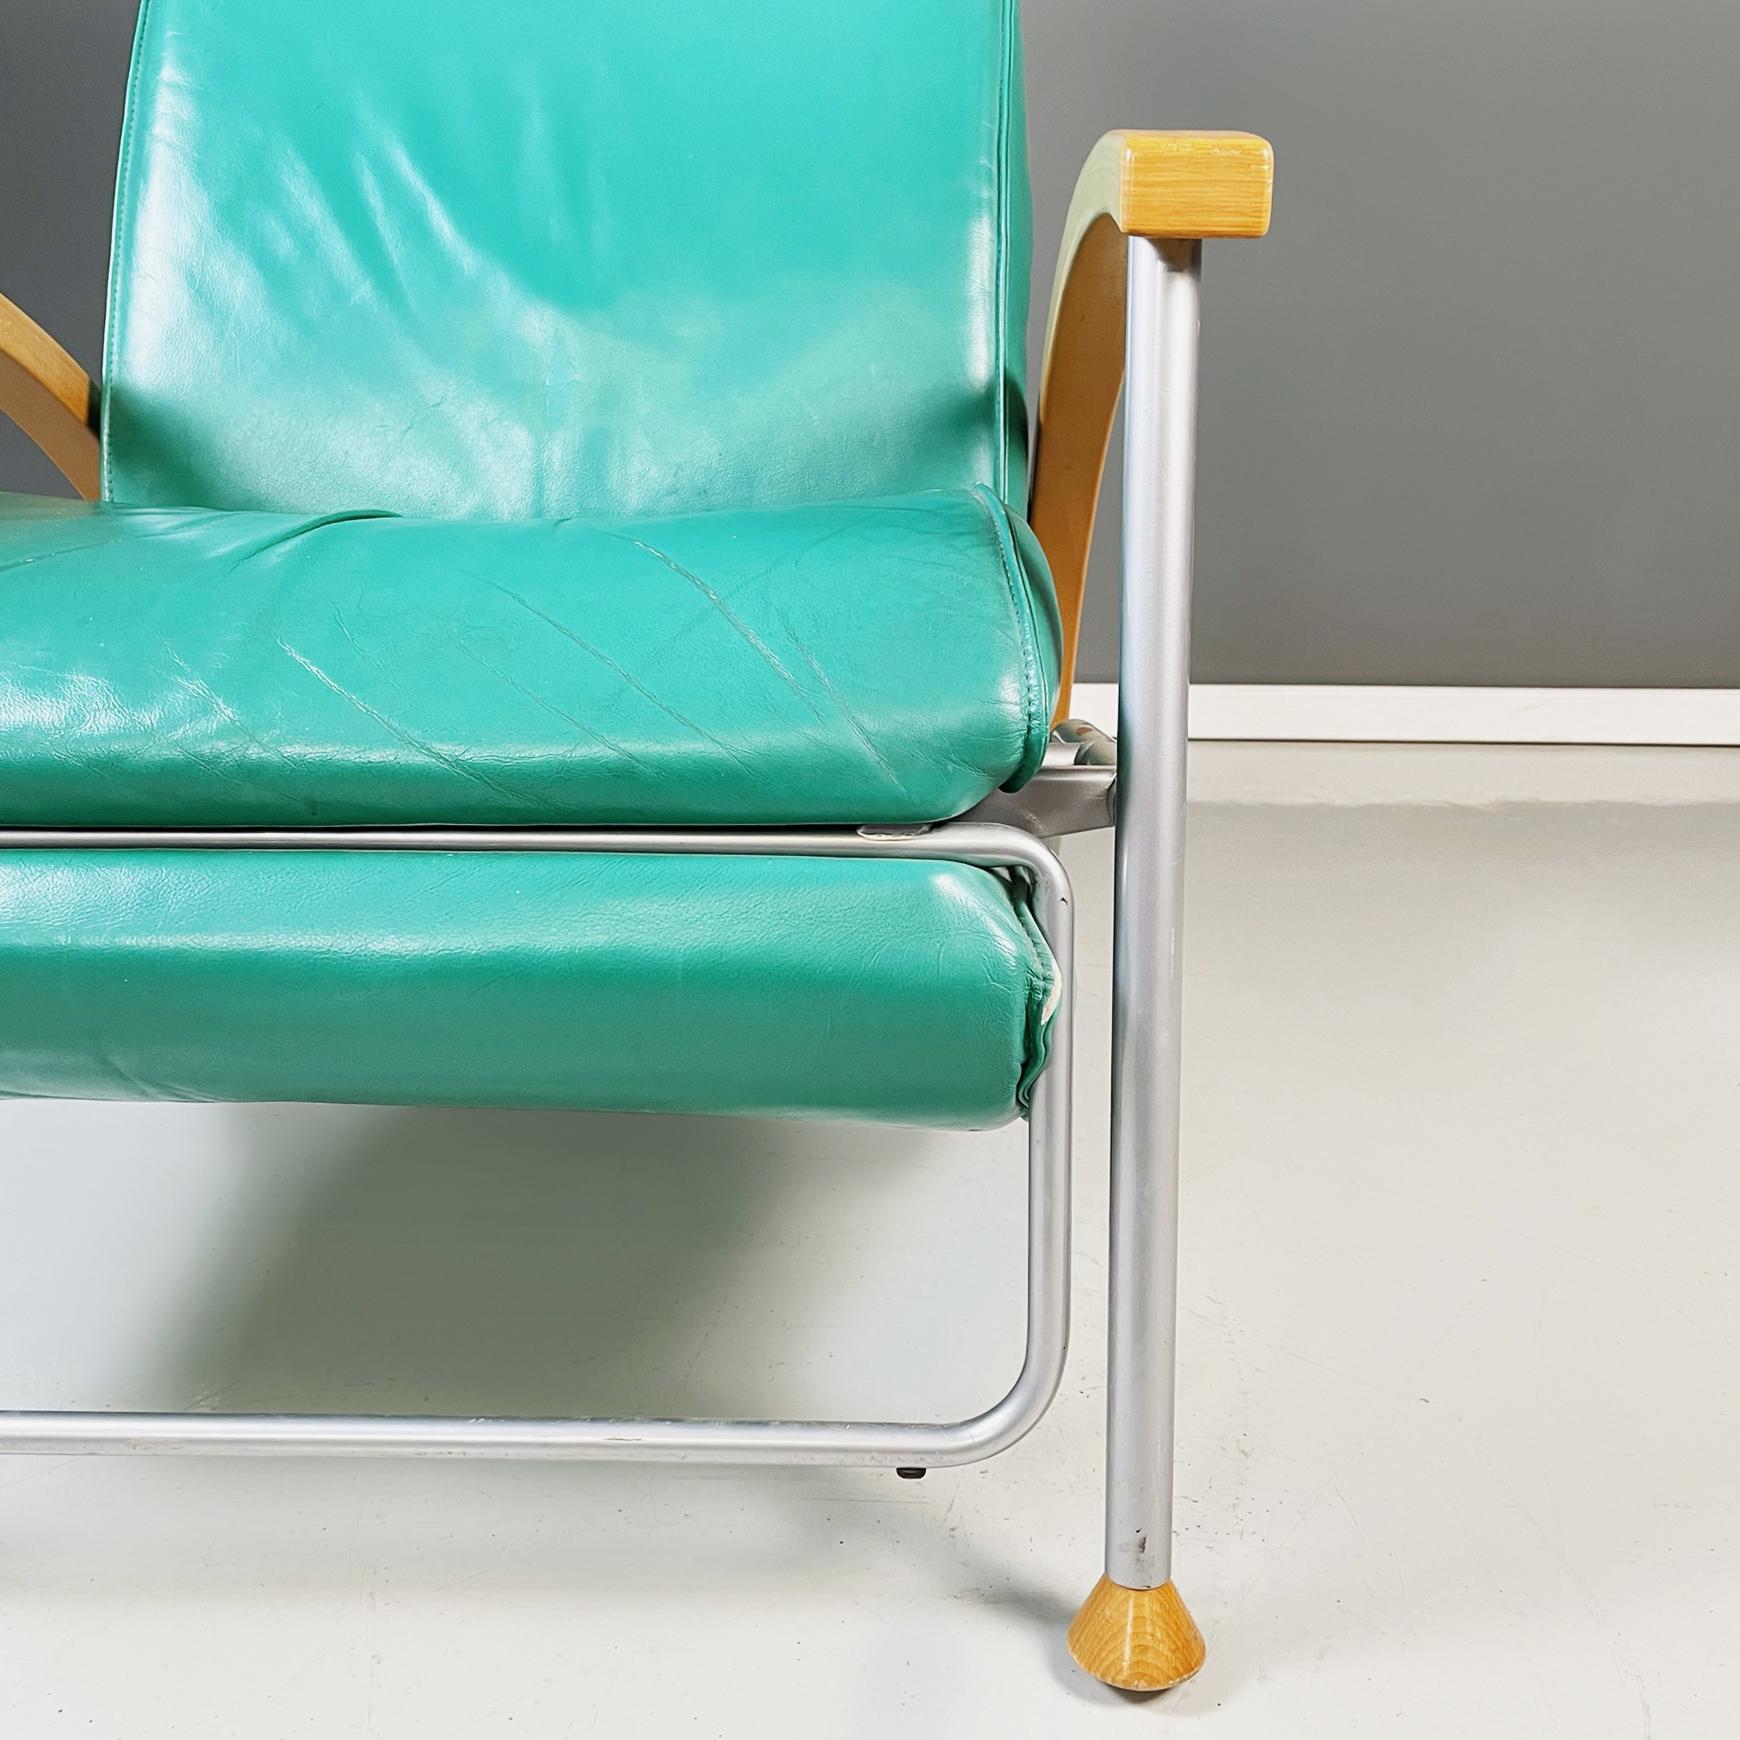 Italian Modern Armchair in Aqua-Green Leather, Wood and Metal, 1980s For Sale 4